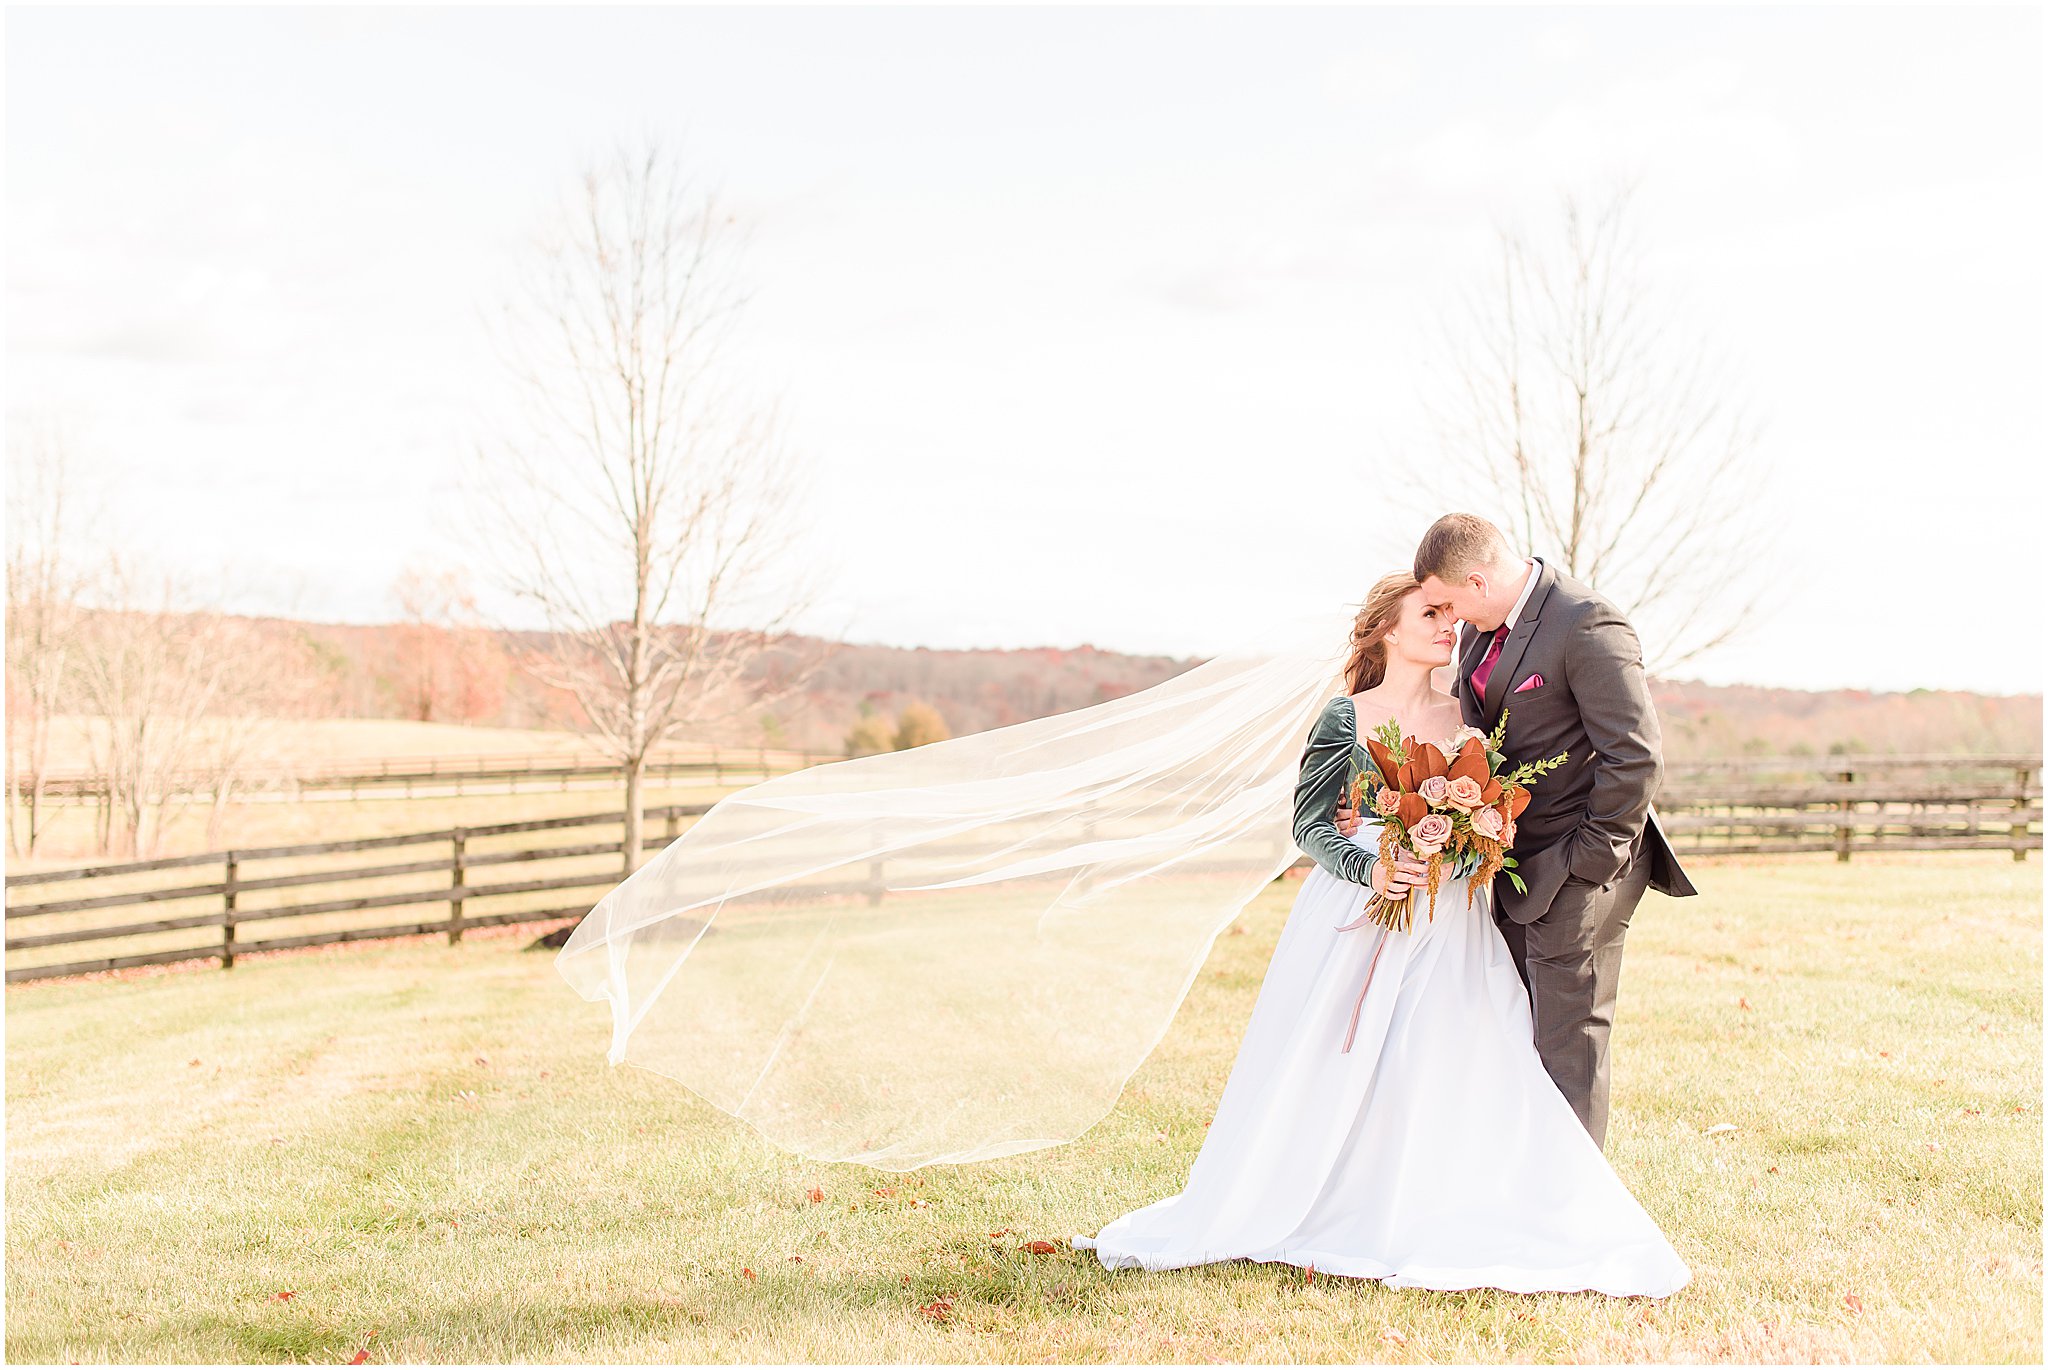 Bride and groom nuzzling with veil blowing in the wind Mount Ida Farm wedding